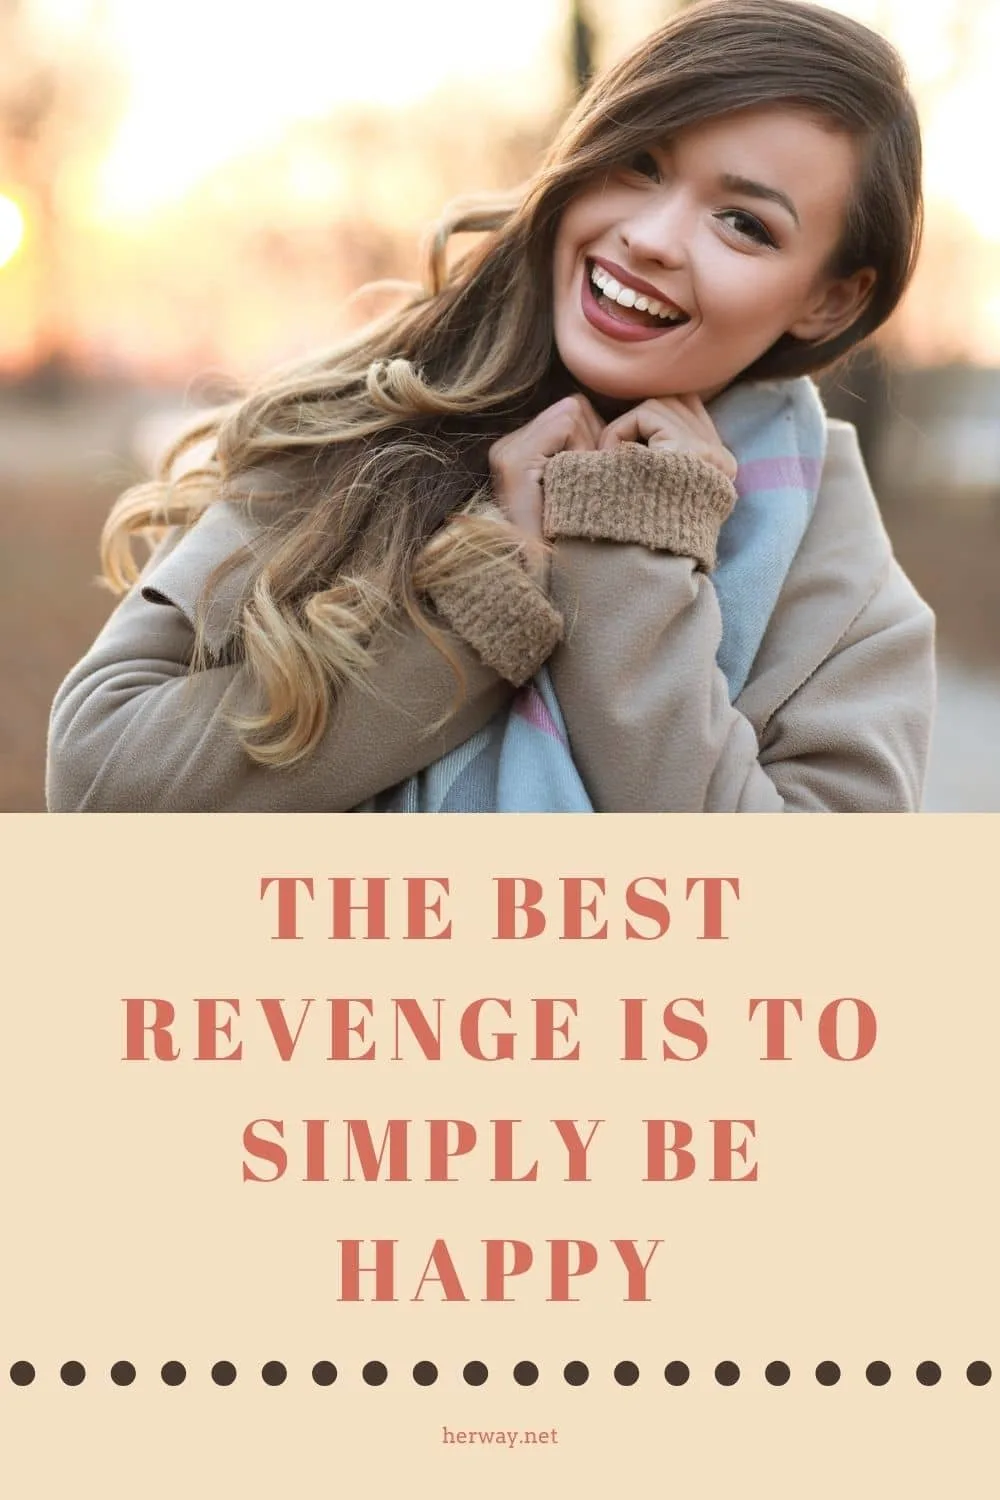 The Best Revenge Is To Simply Be Happy